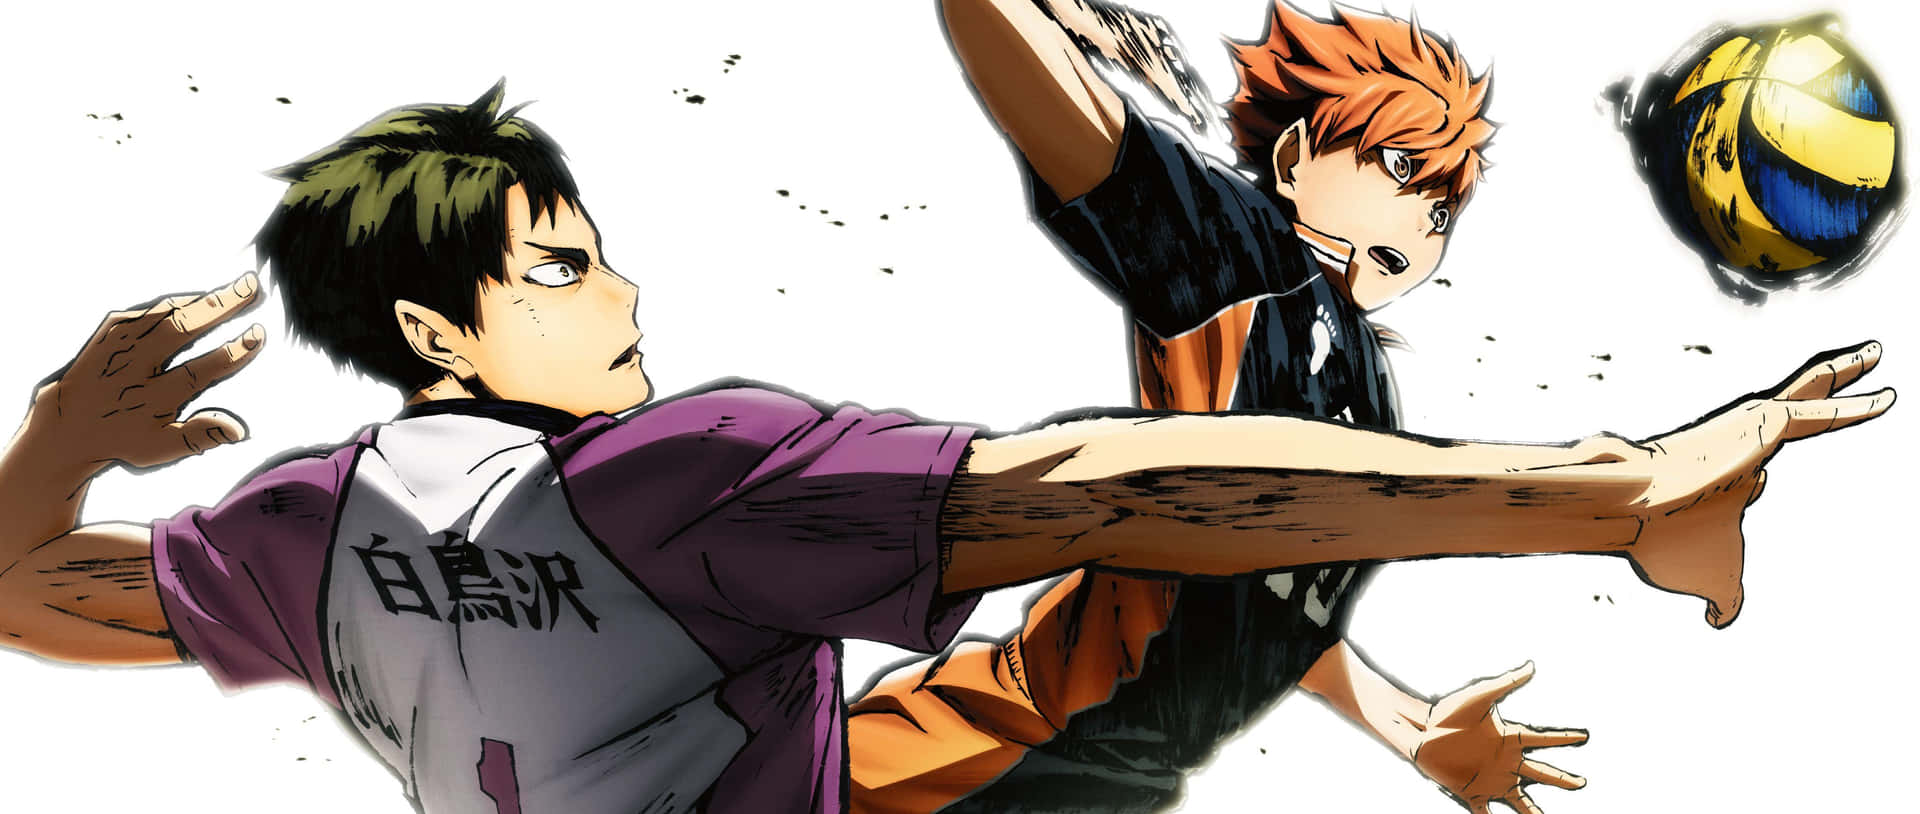 A Reflection of the Passion in Haikyuu